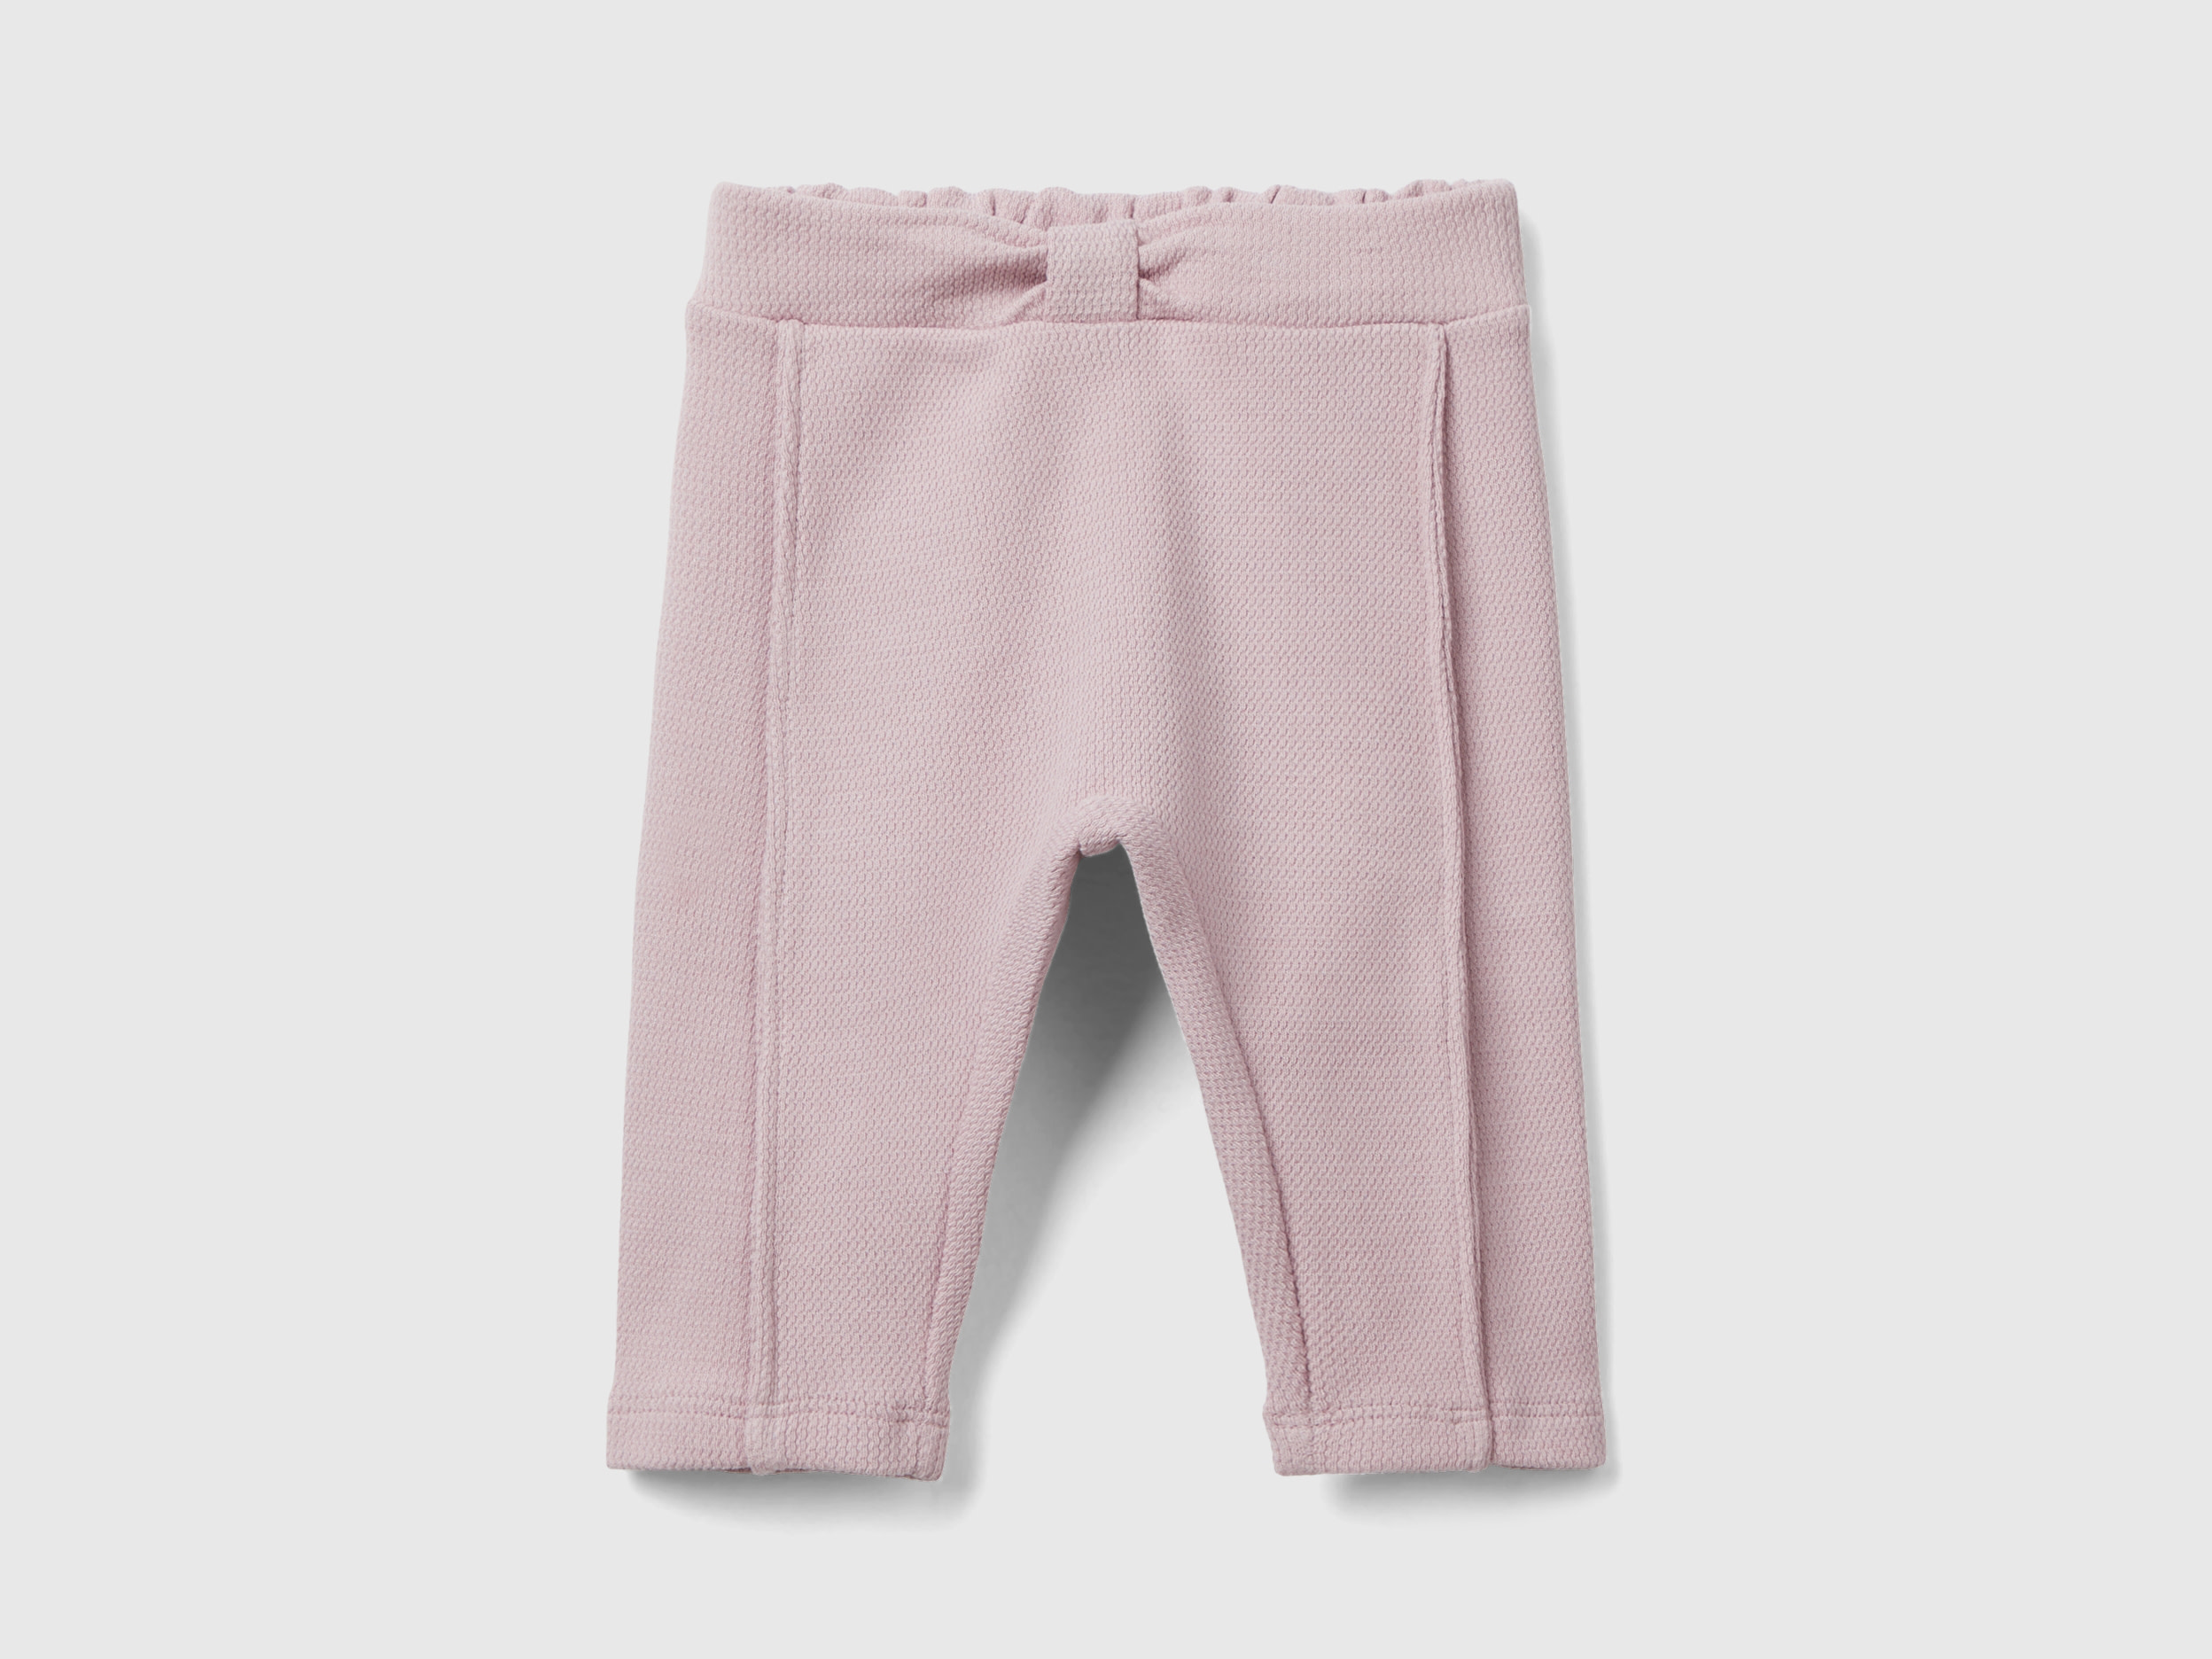 Benetton, Trousers With Knotted Waist, size 0-1, Pink, Kids